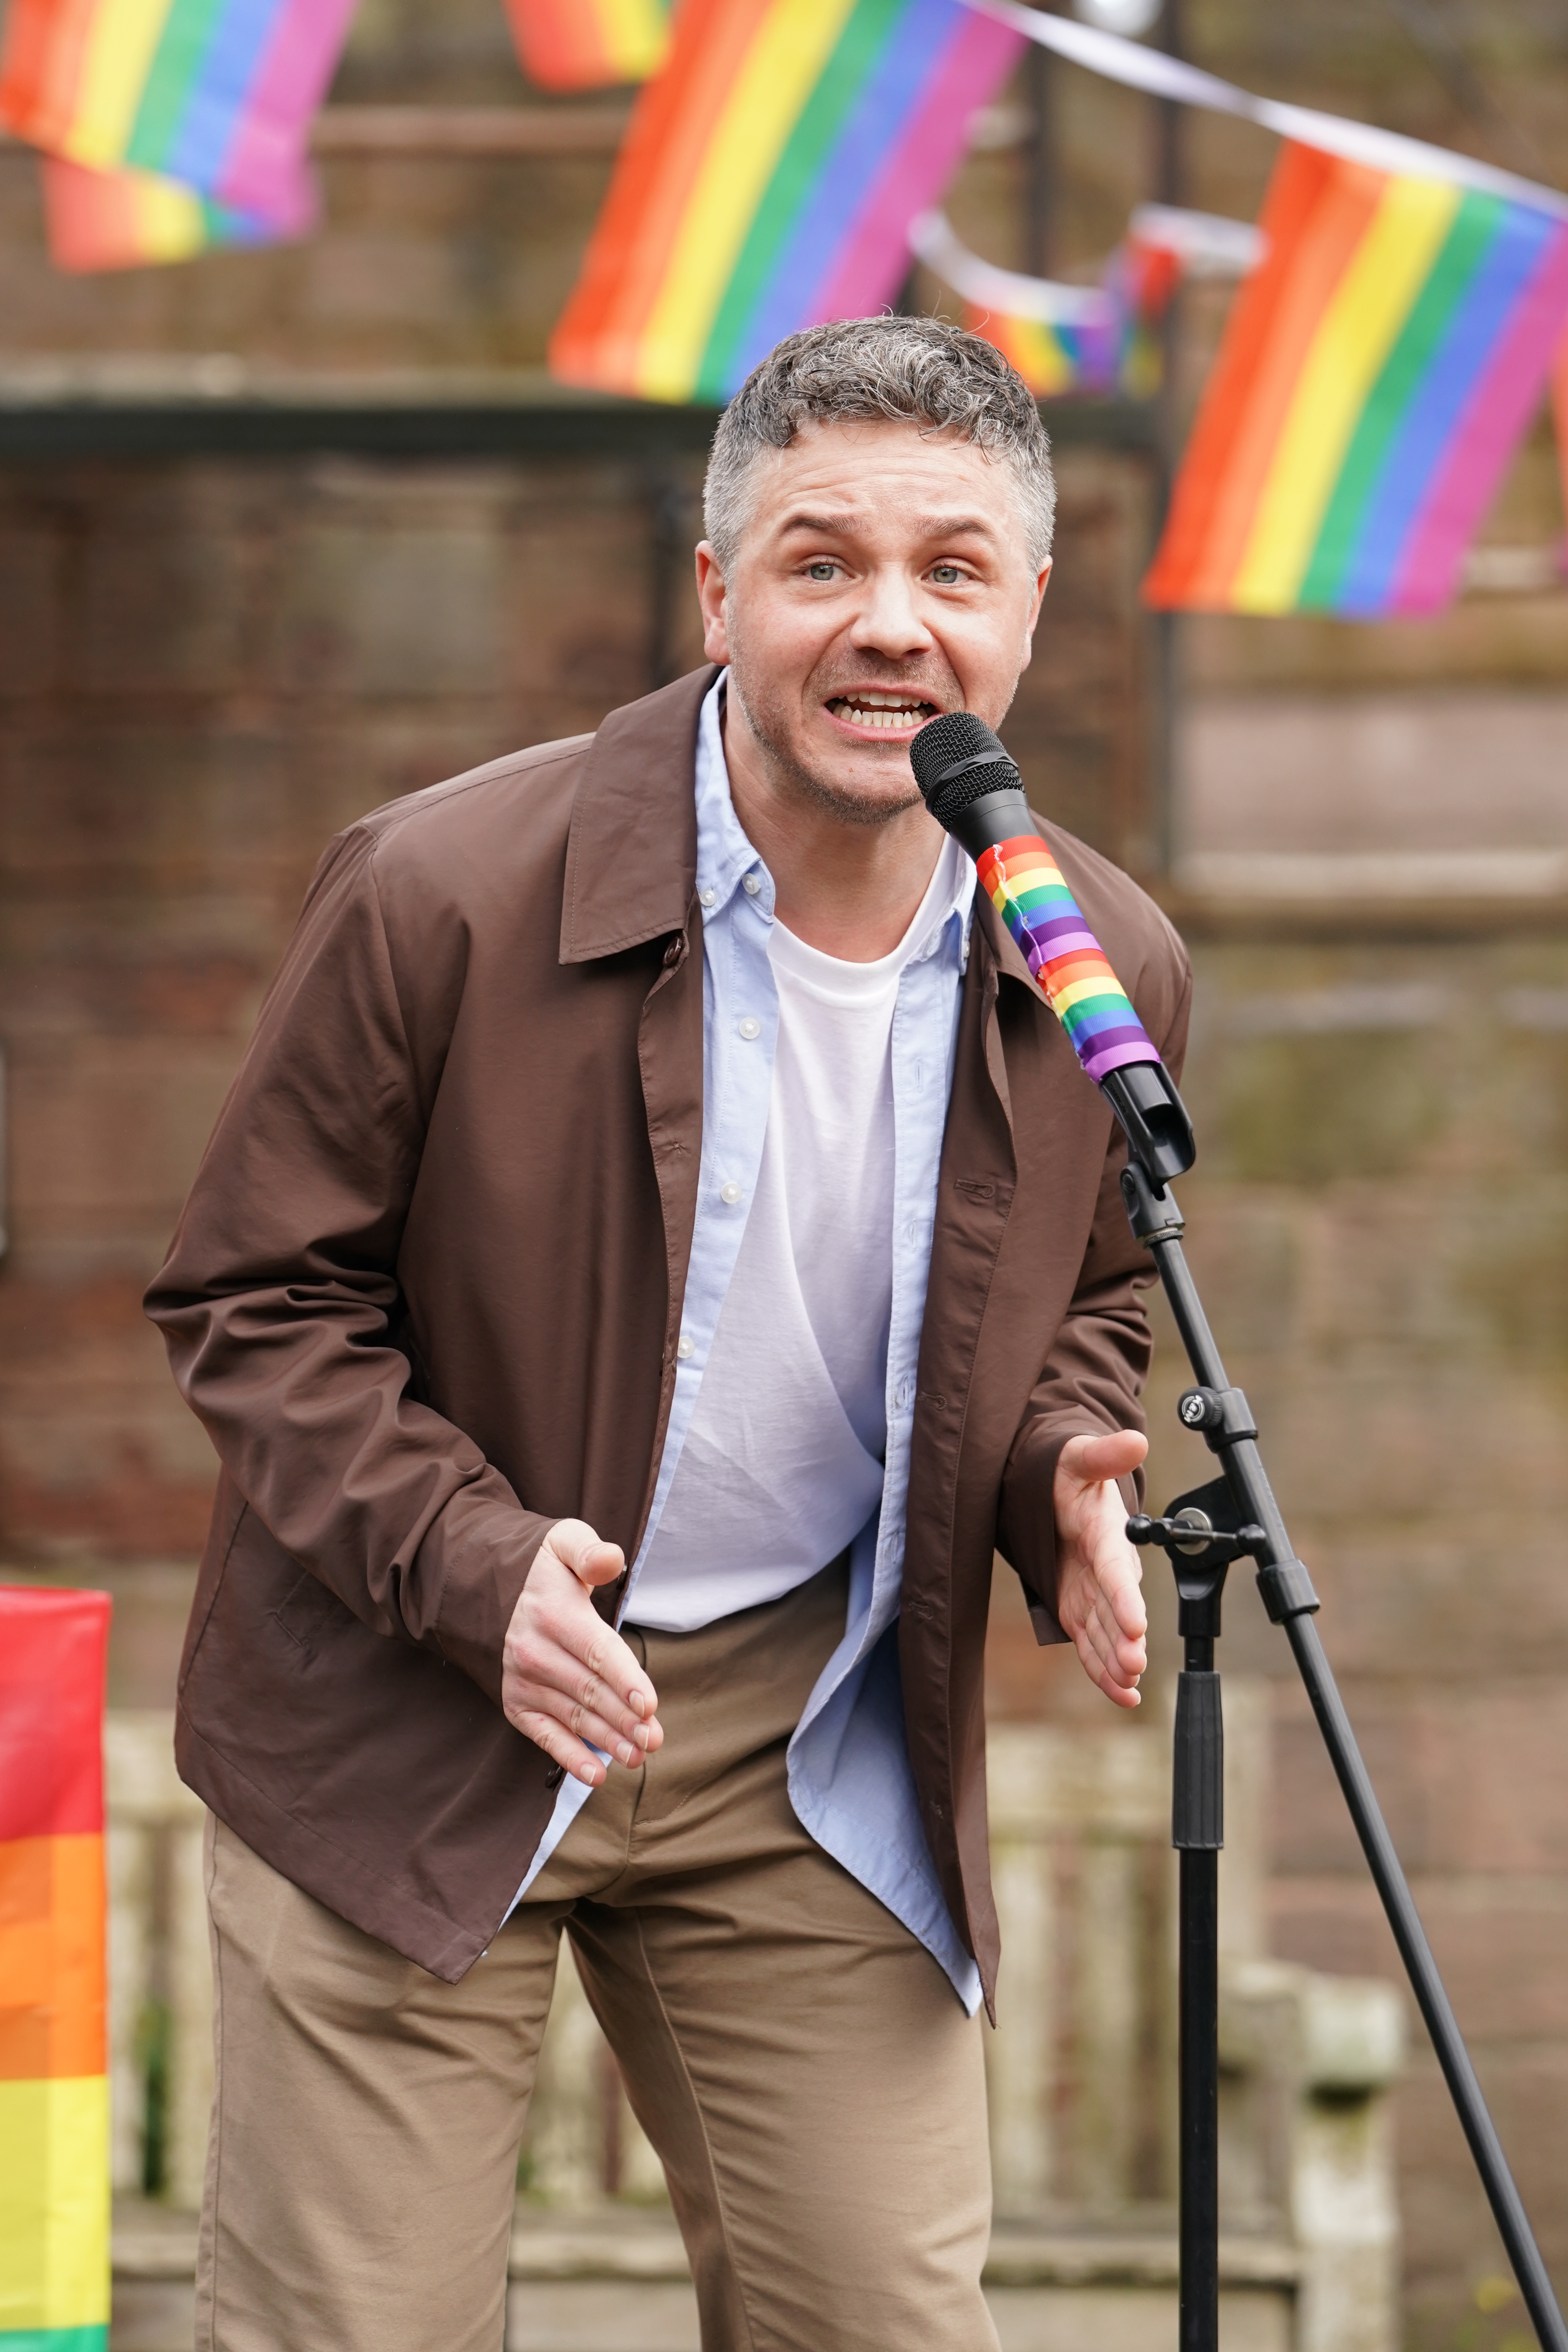 Carter Shepherd on stage at Pride.